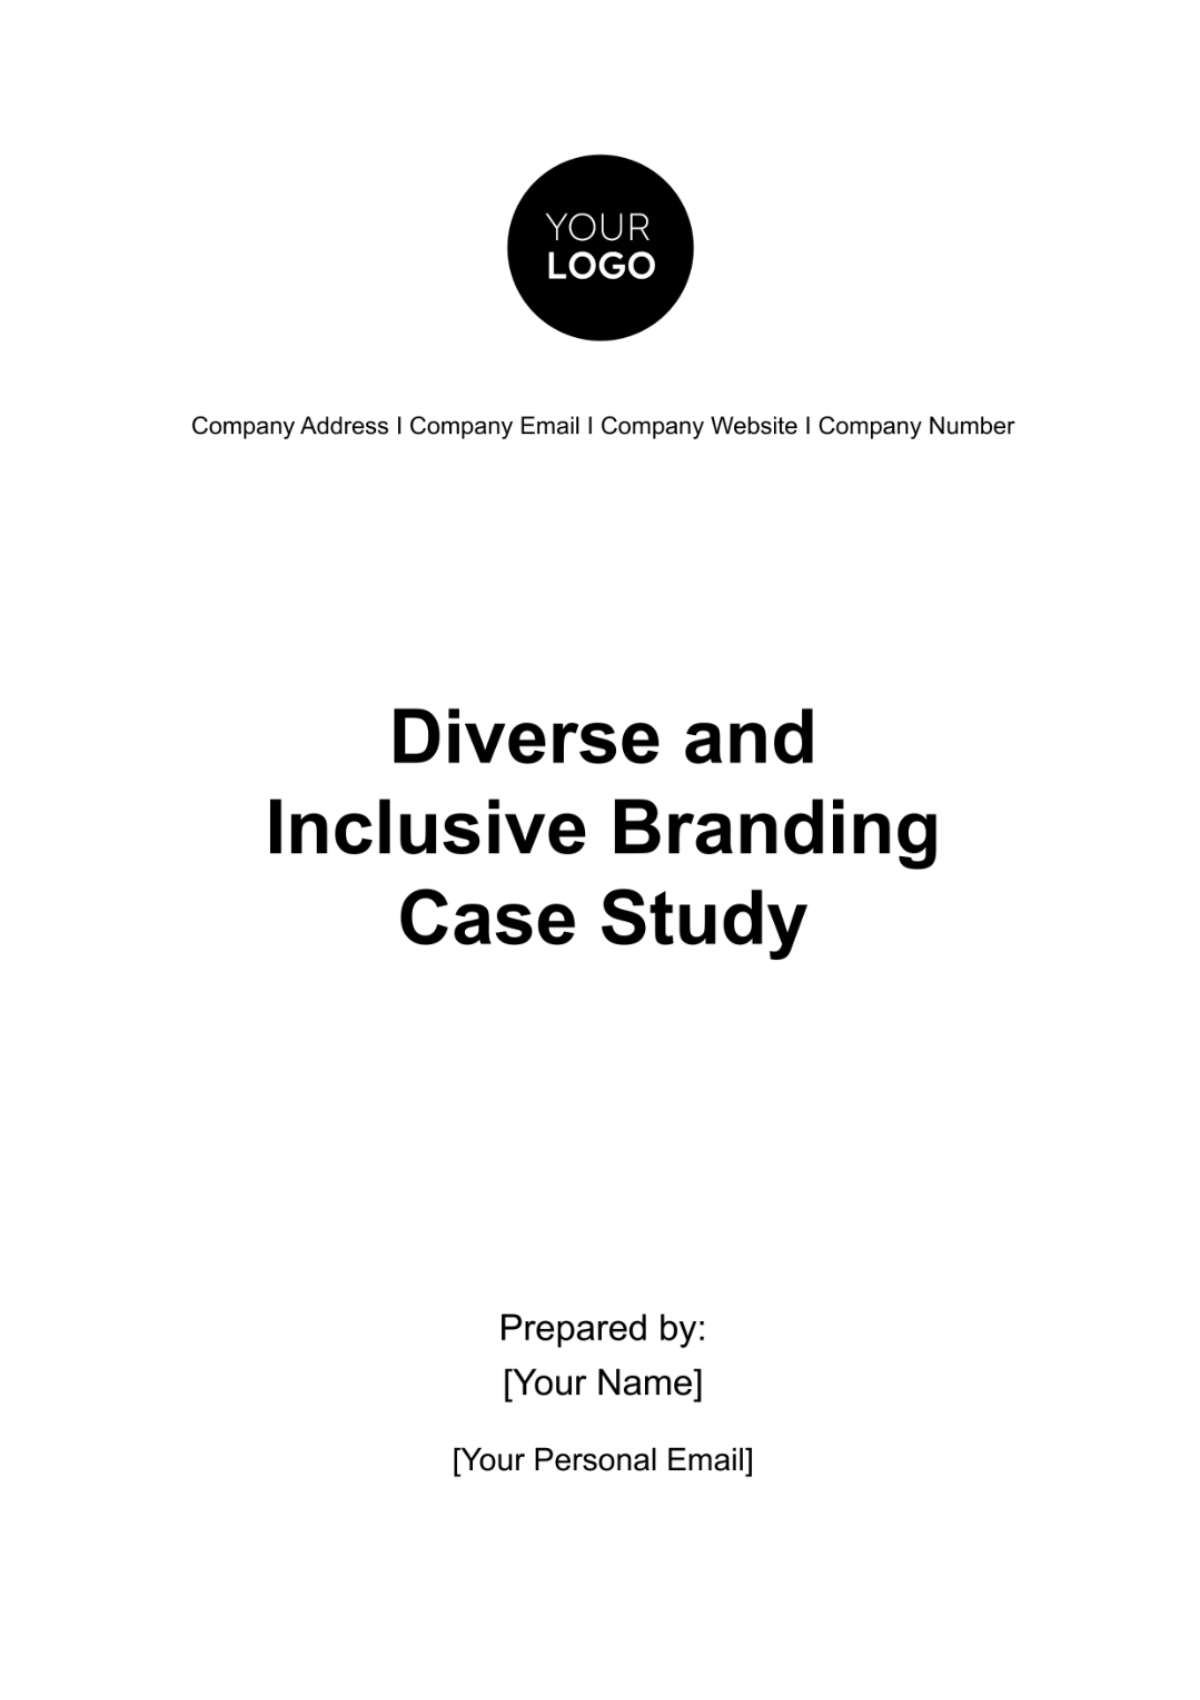 Free Diverse and Inclusive Branding Case Study HR Template